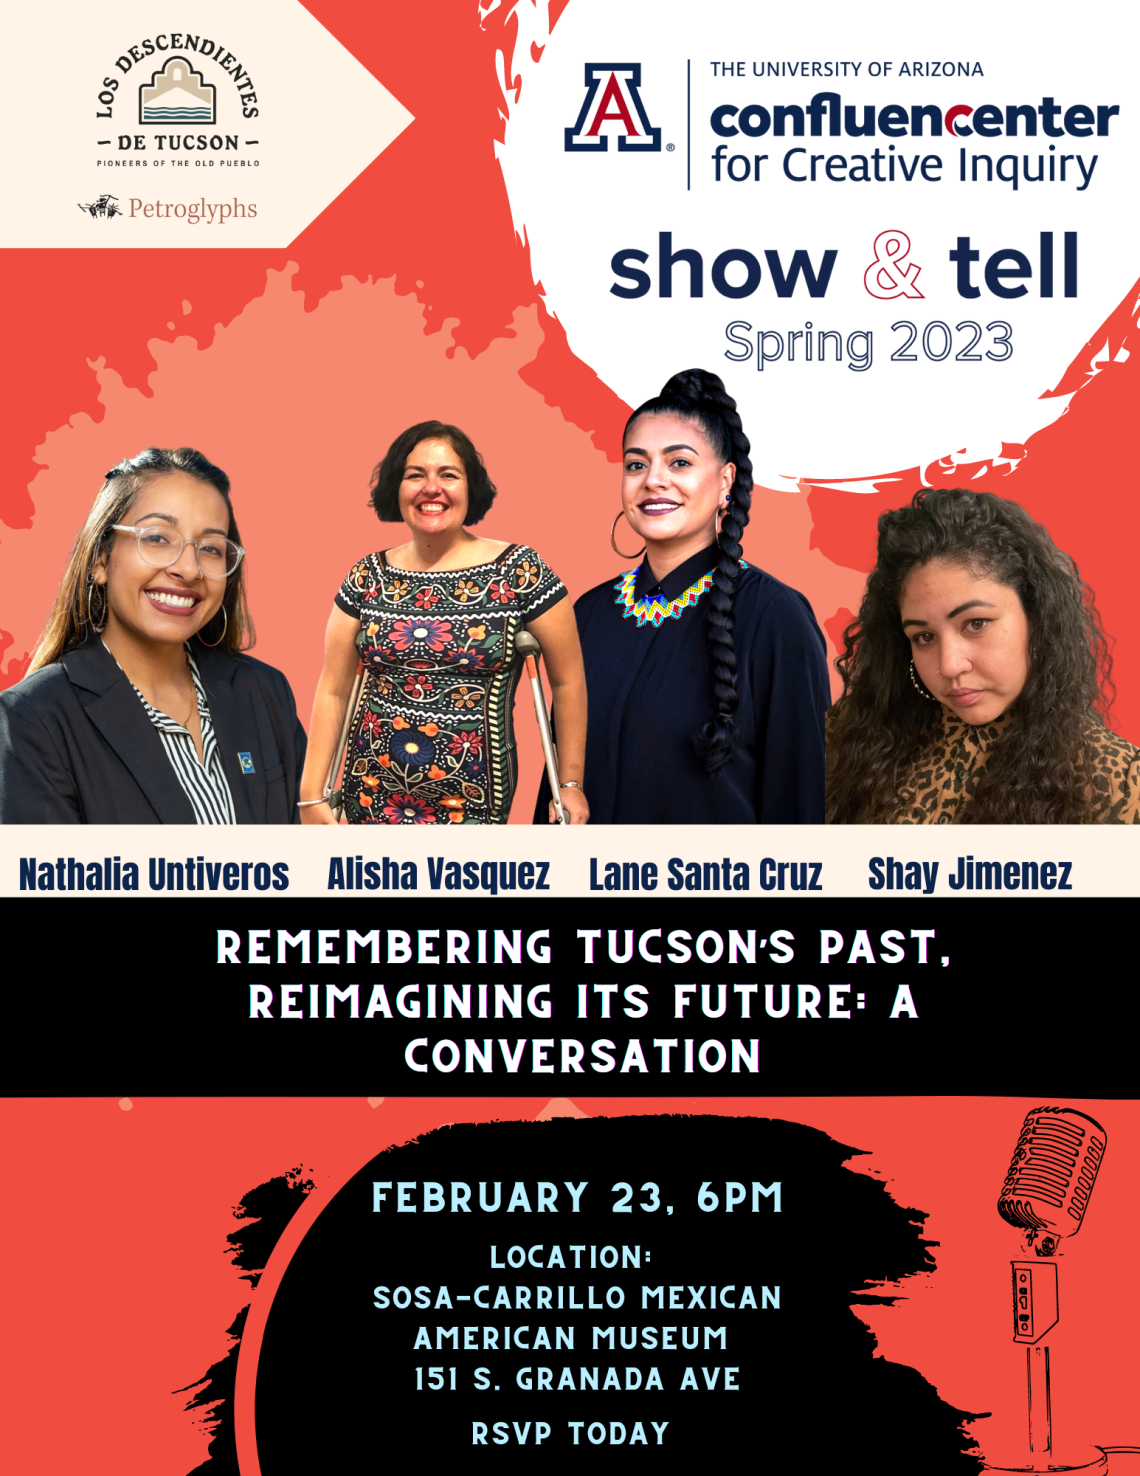 Remembering Tucson's Past, Re-imagining its Future: A Conservation. February 23 Location Sosa Carrillo Mexican American Museum 151 S Granada Ave, RSVP Today 